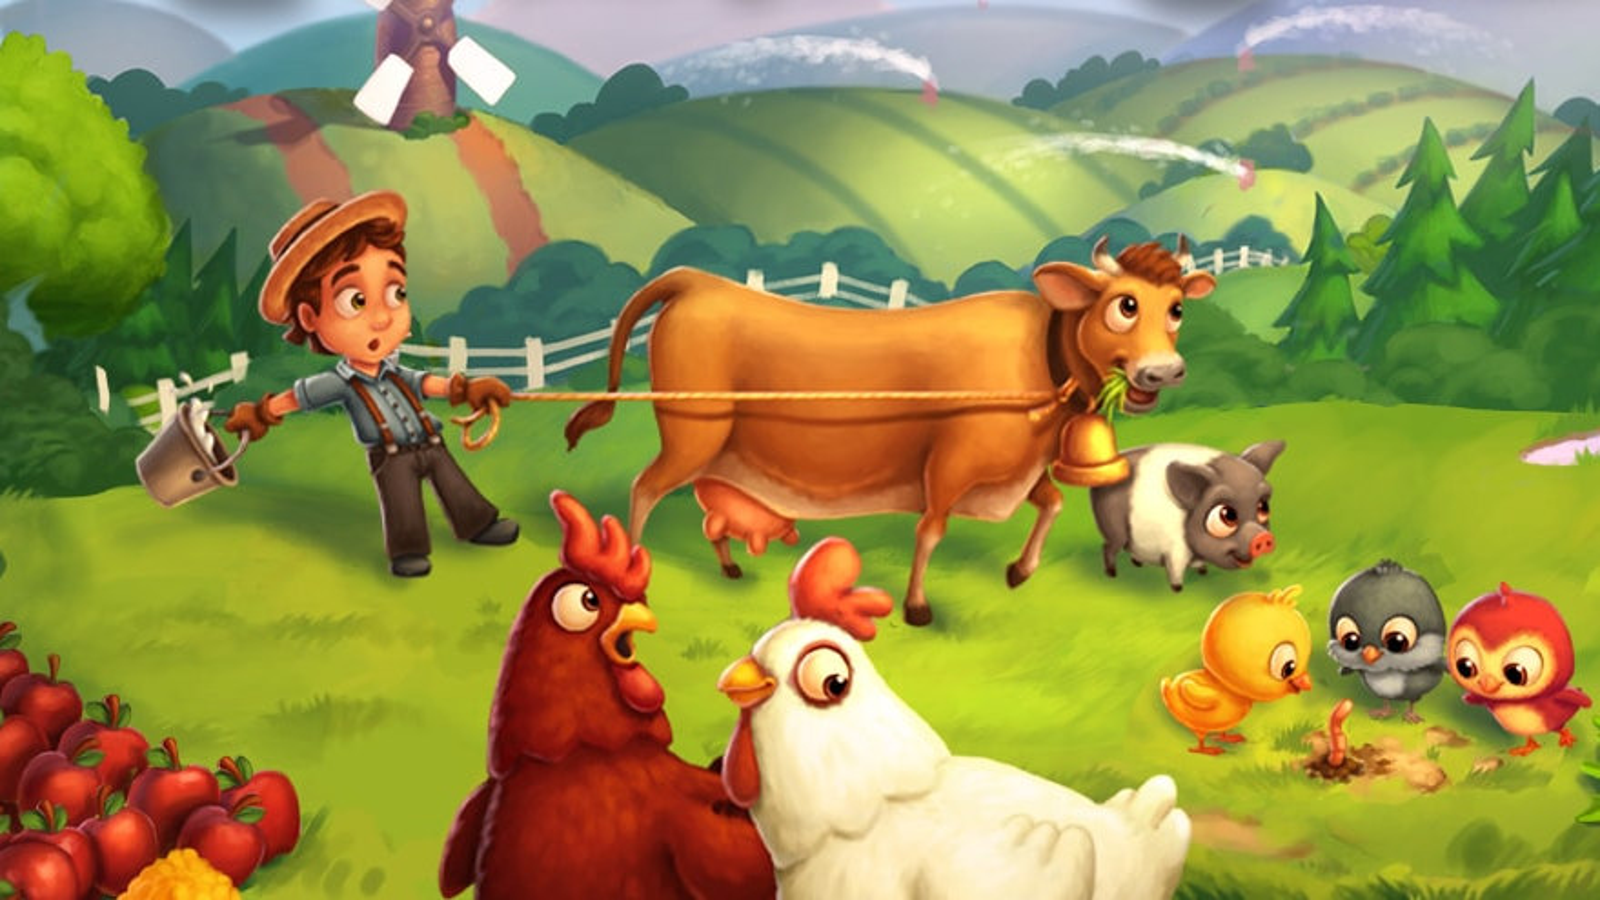 Zynga woos back lapsed Facebook farmers with 'FarmVille 2